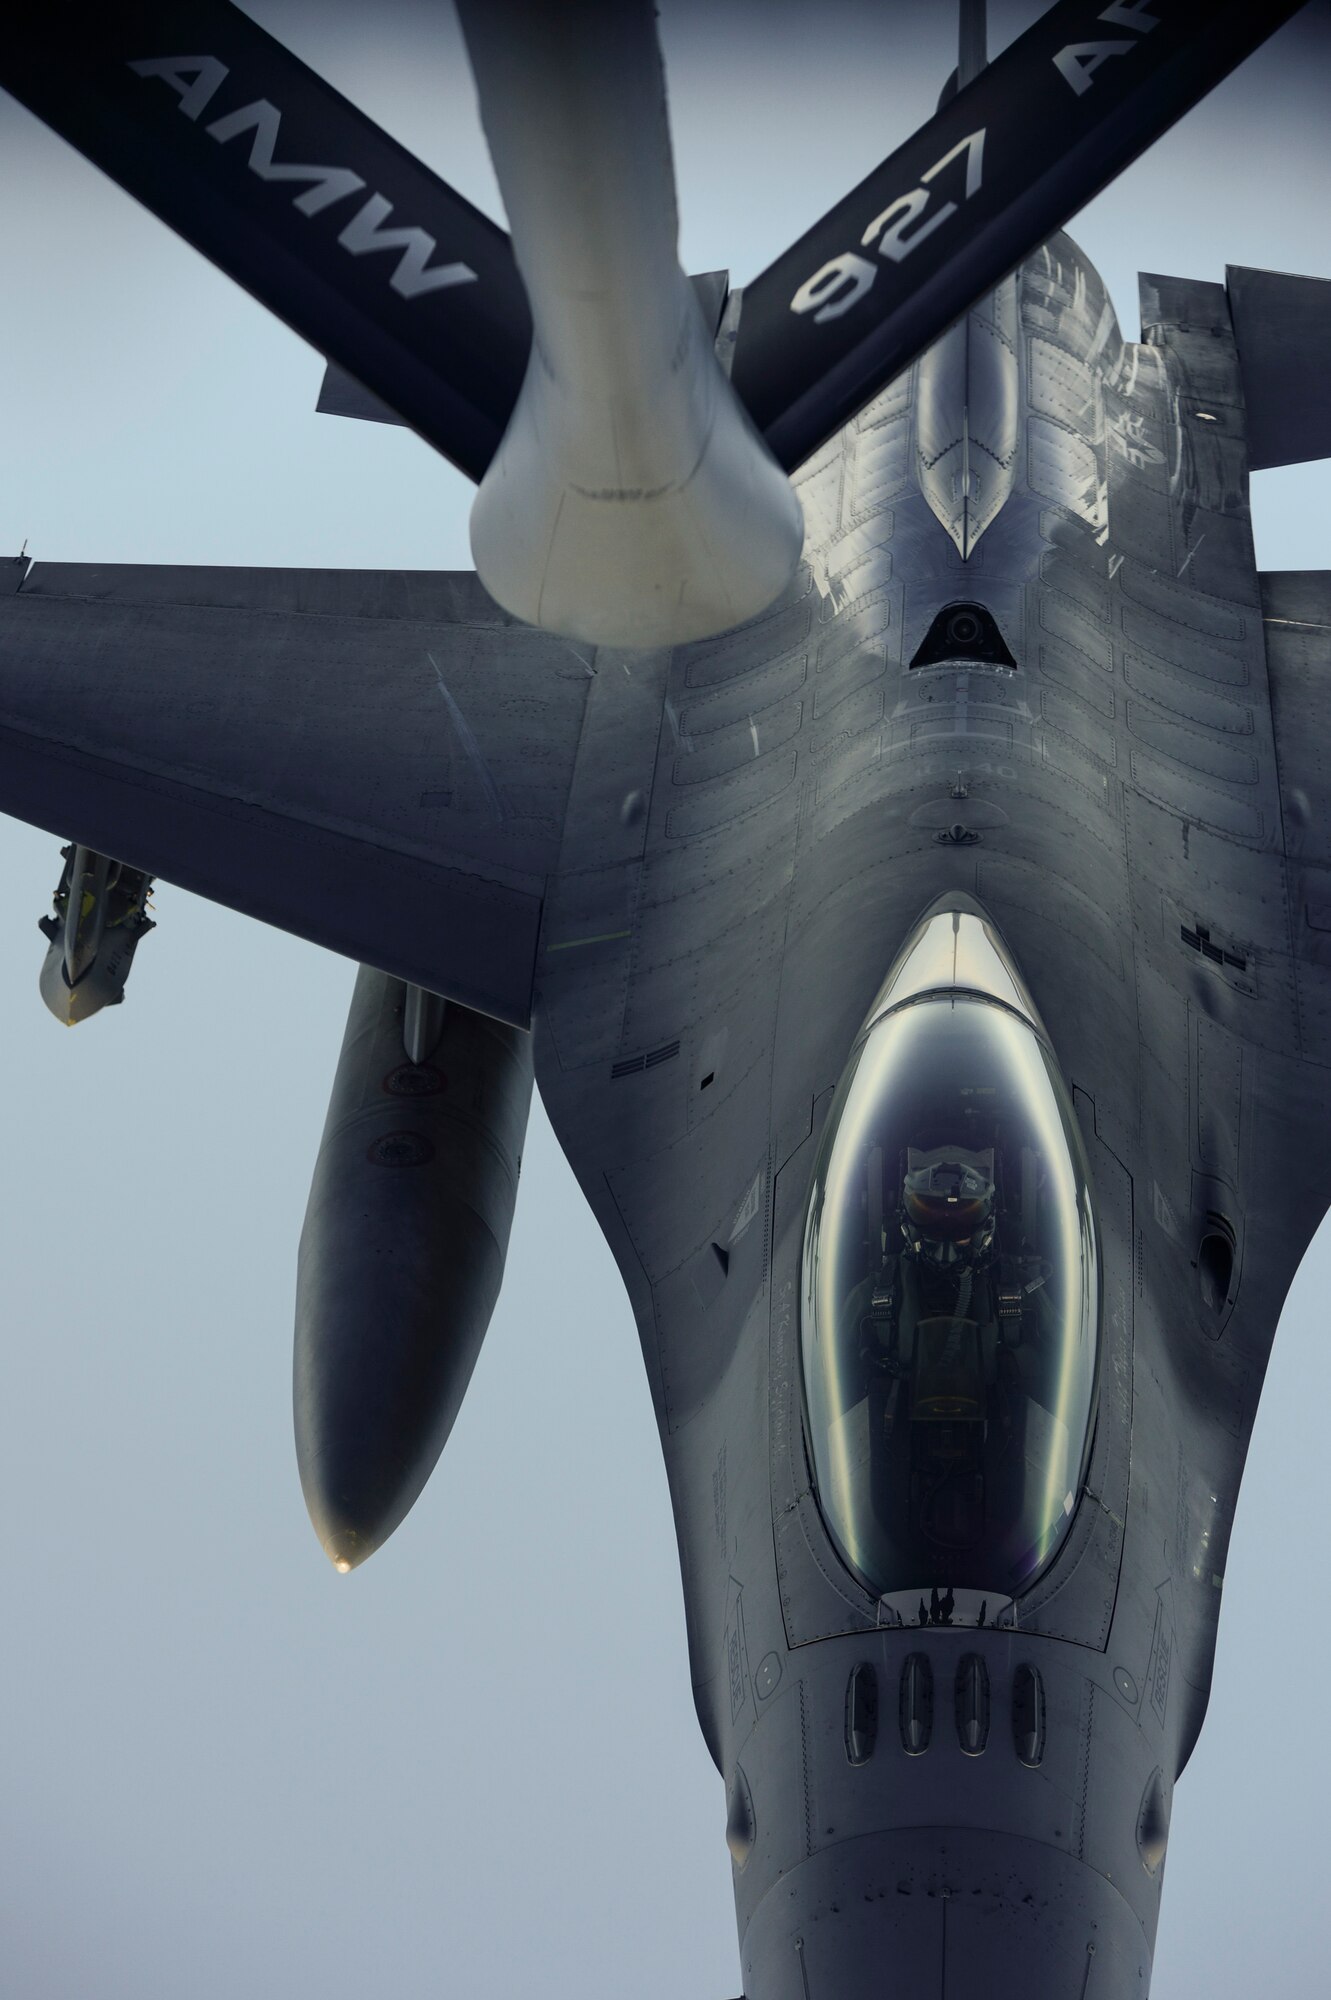 An F-16 Fighting Falcon fighter aircraft assigned to the 480th Expeditionary Fighter Squadron, Spangdahlem Air Base, Germany, lines up for refueling by a KC-135 Stratotanker assigned to the 63rd Air Refueling Squadron, 927th Operations Group at MacDill Air Force Base, Fla., during a flying training deployment at Souda Bay, Greece, Feb. 2, 2016. The 63rd ARS is operating out of Souda Bay Naval Air Station for the duration of the FTD. (U.S. Air Force photo by Staff Sgt. Christopher Ruano/Released)